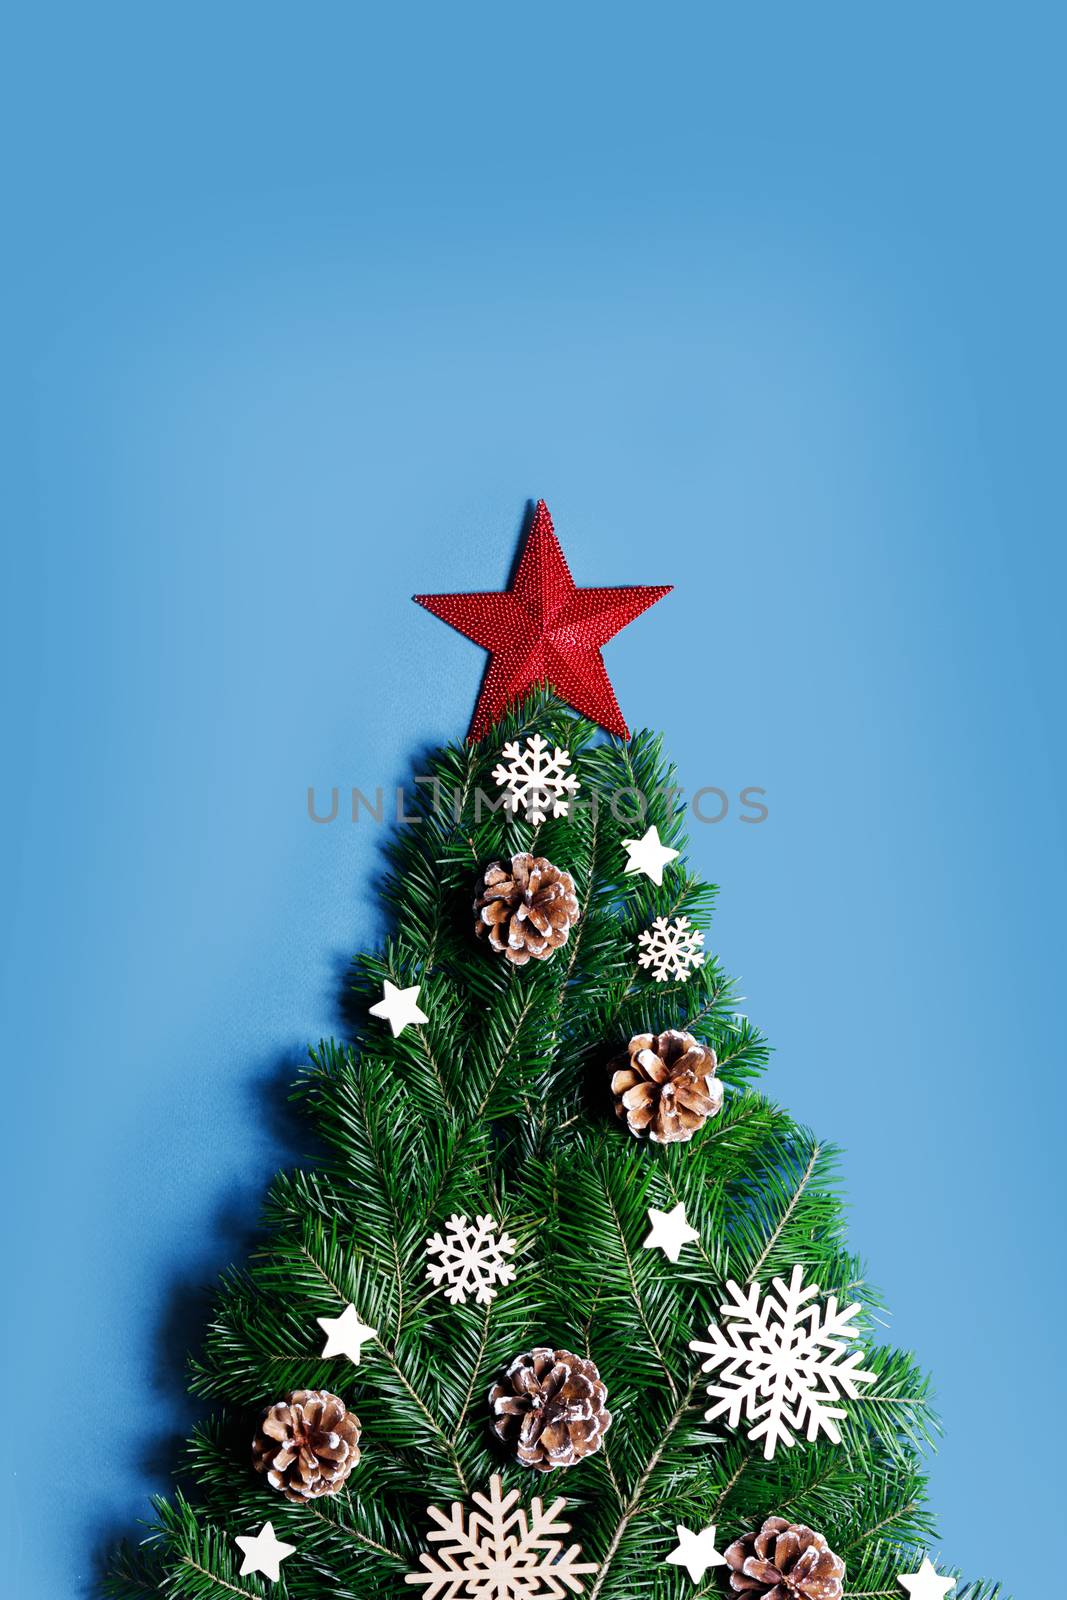 Christmas tree made of natural spruce branches deecor with red star on blue background, flat lay card with copy space